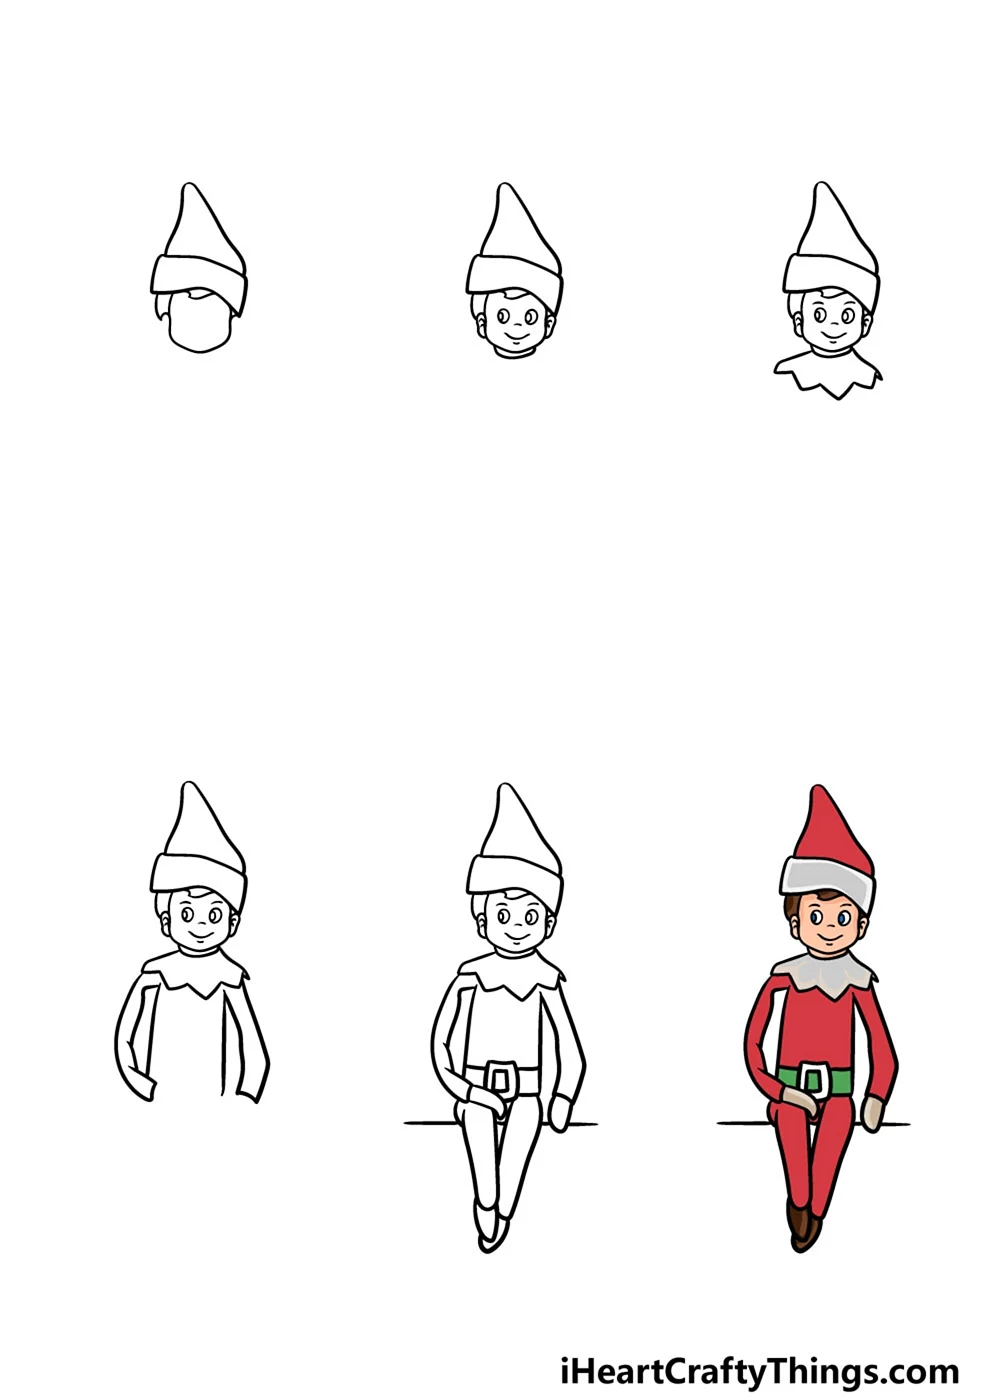 How to draw a Elf